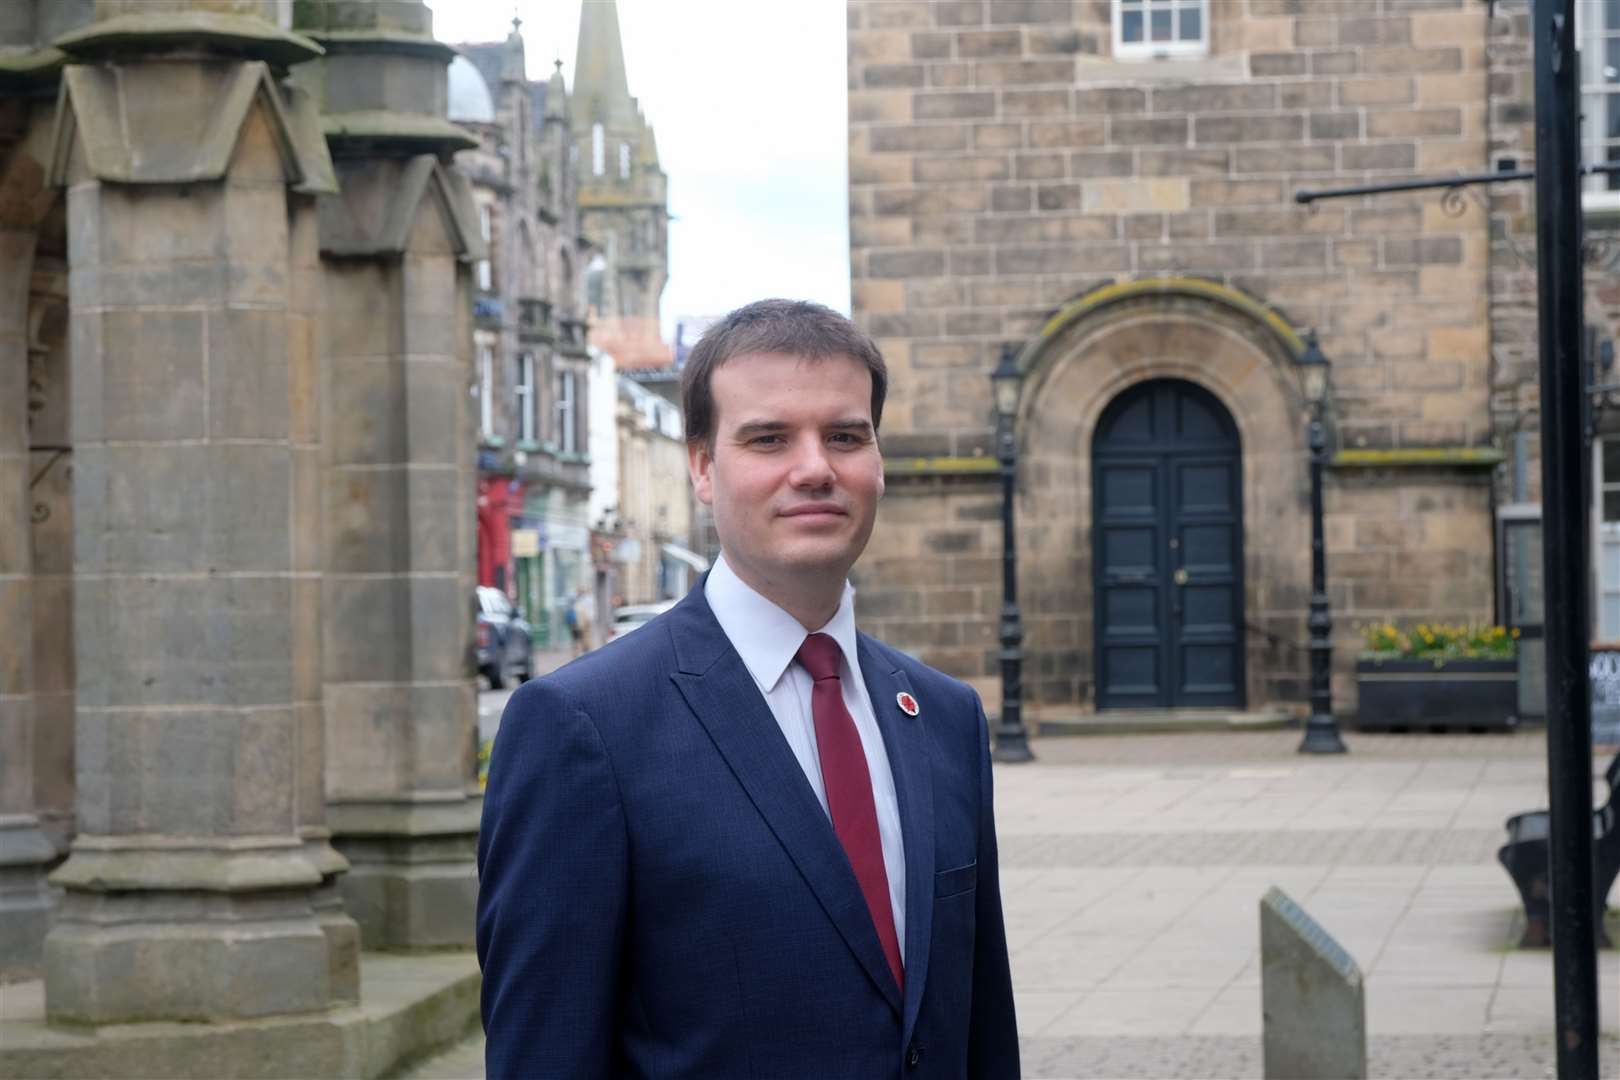 James Hynam will be the Labour candidate for the upcoming general election.